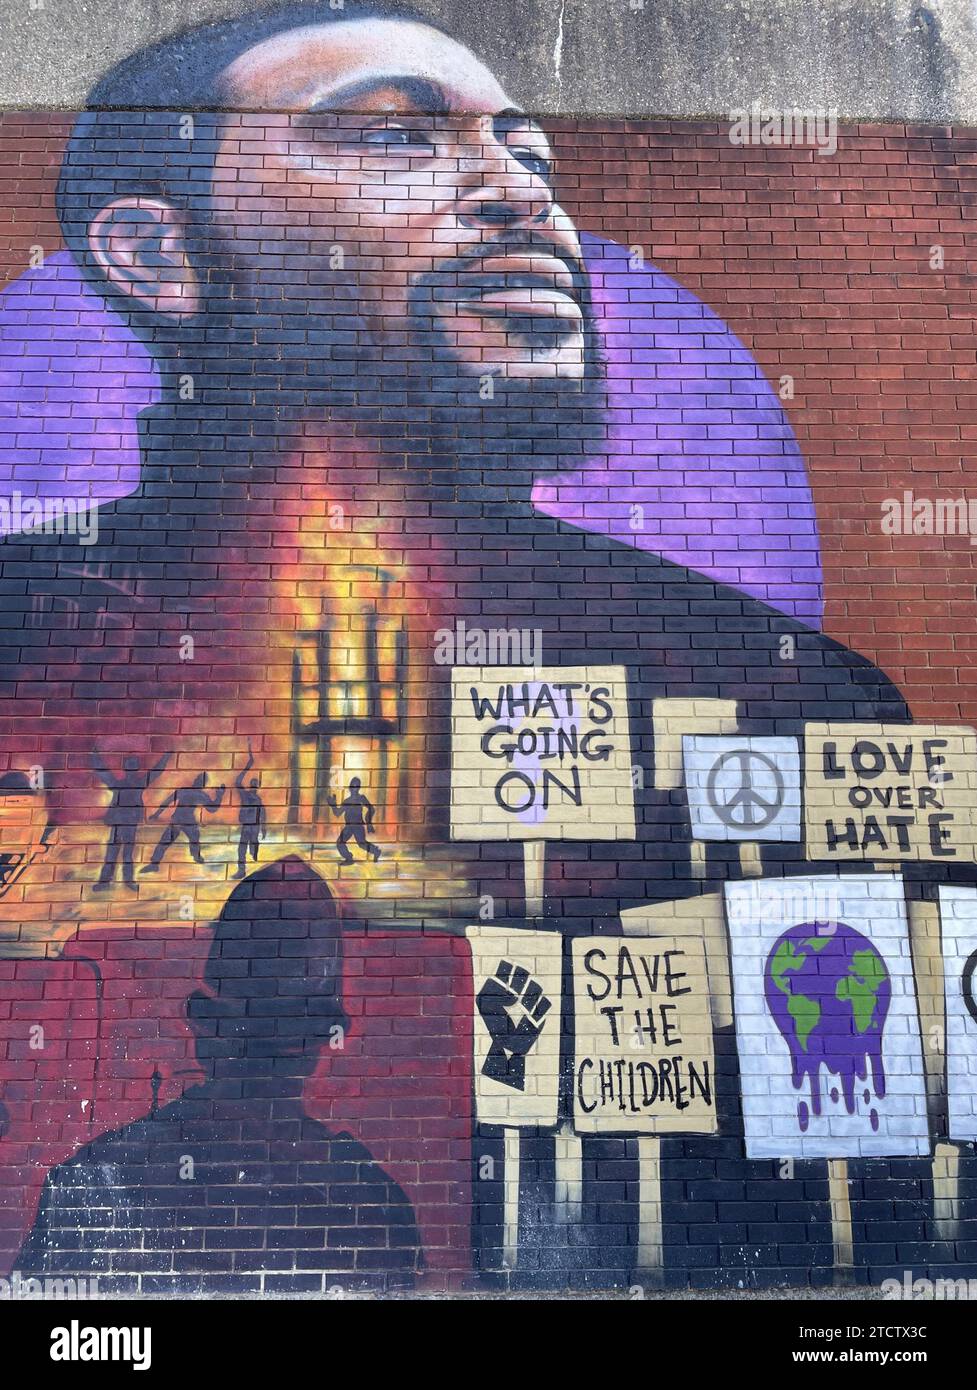 Art mural à Brixton, Angleterre, Royaume-Uni chanson de Marvin Gaye What’s Going On Banque D'Images